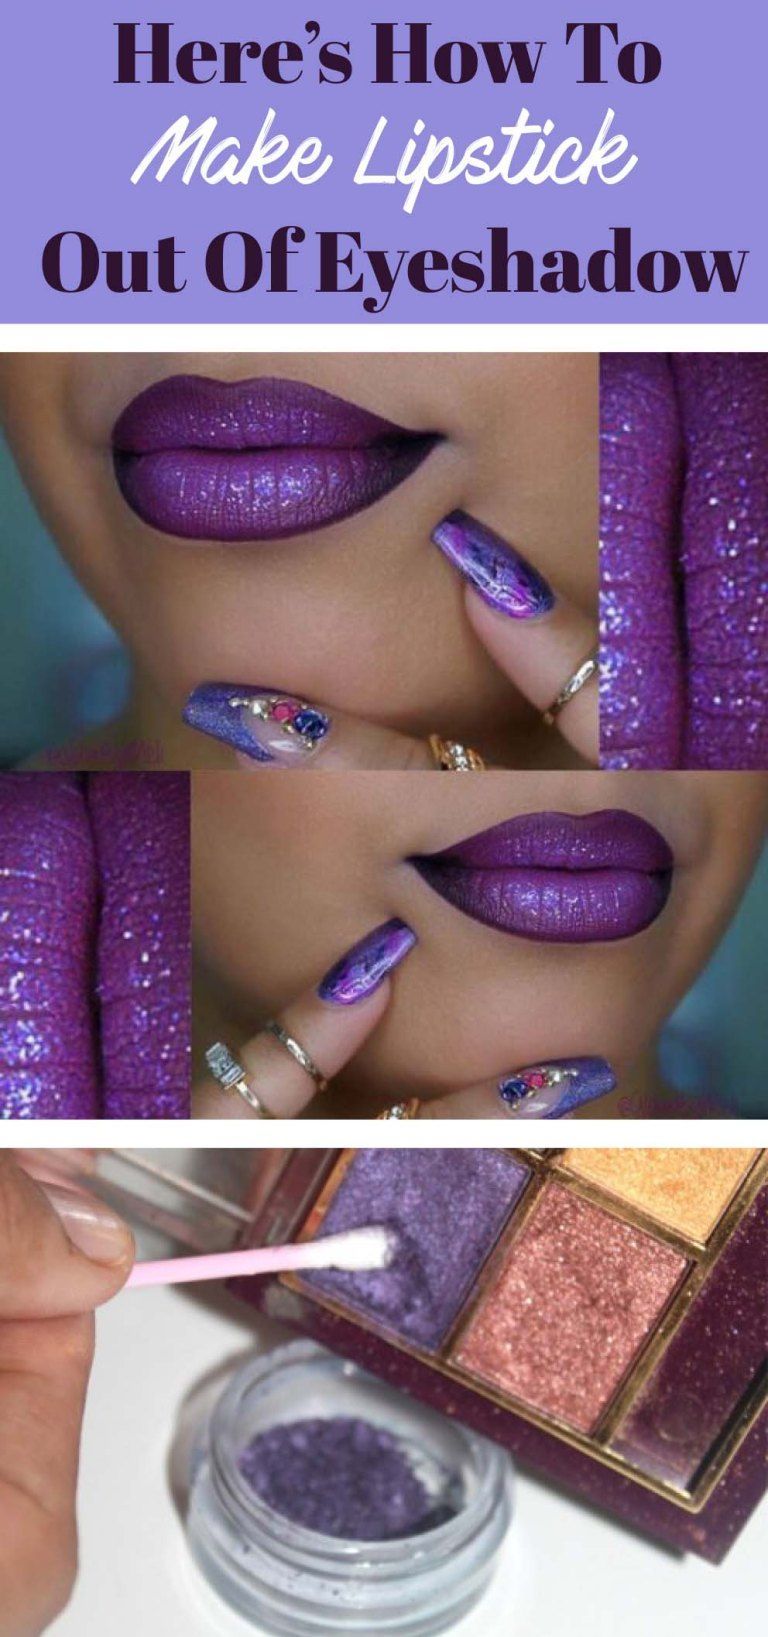 Here's How To Make Lipstick Out Of Eyeshadow - Society19 - Here's How To Make Lipstick Out Of Eyeshadow - Society19 -   12 diy Makeup lipstick ideas